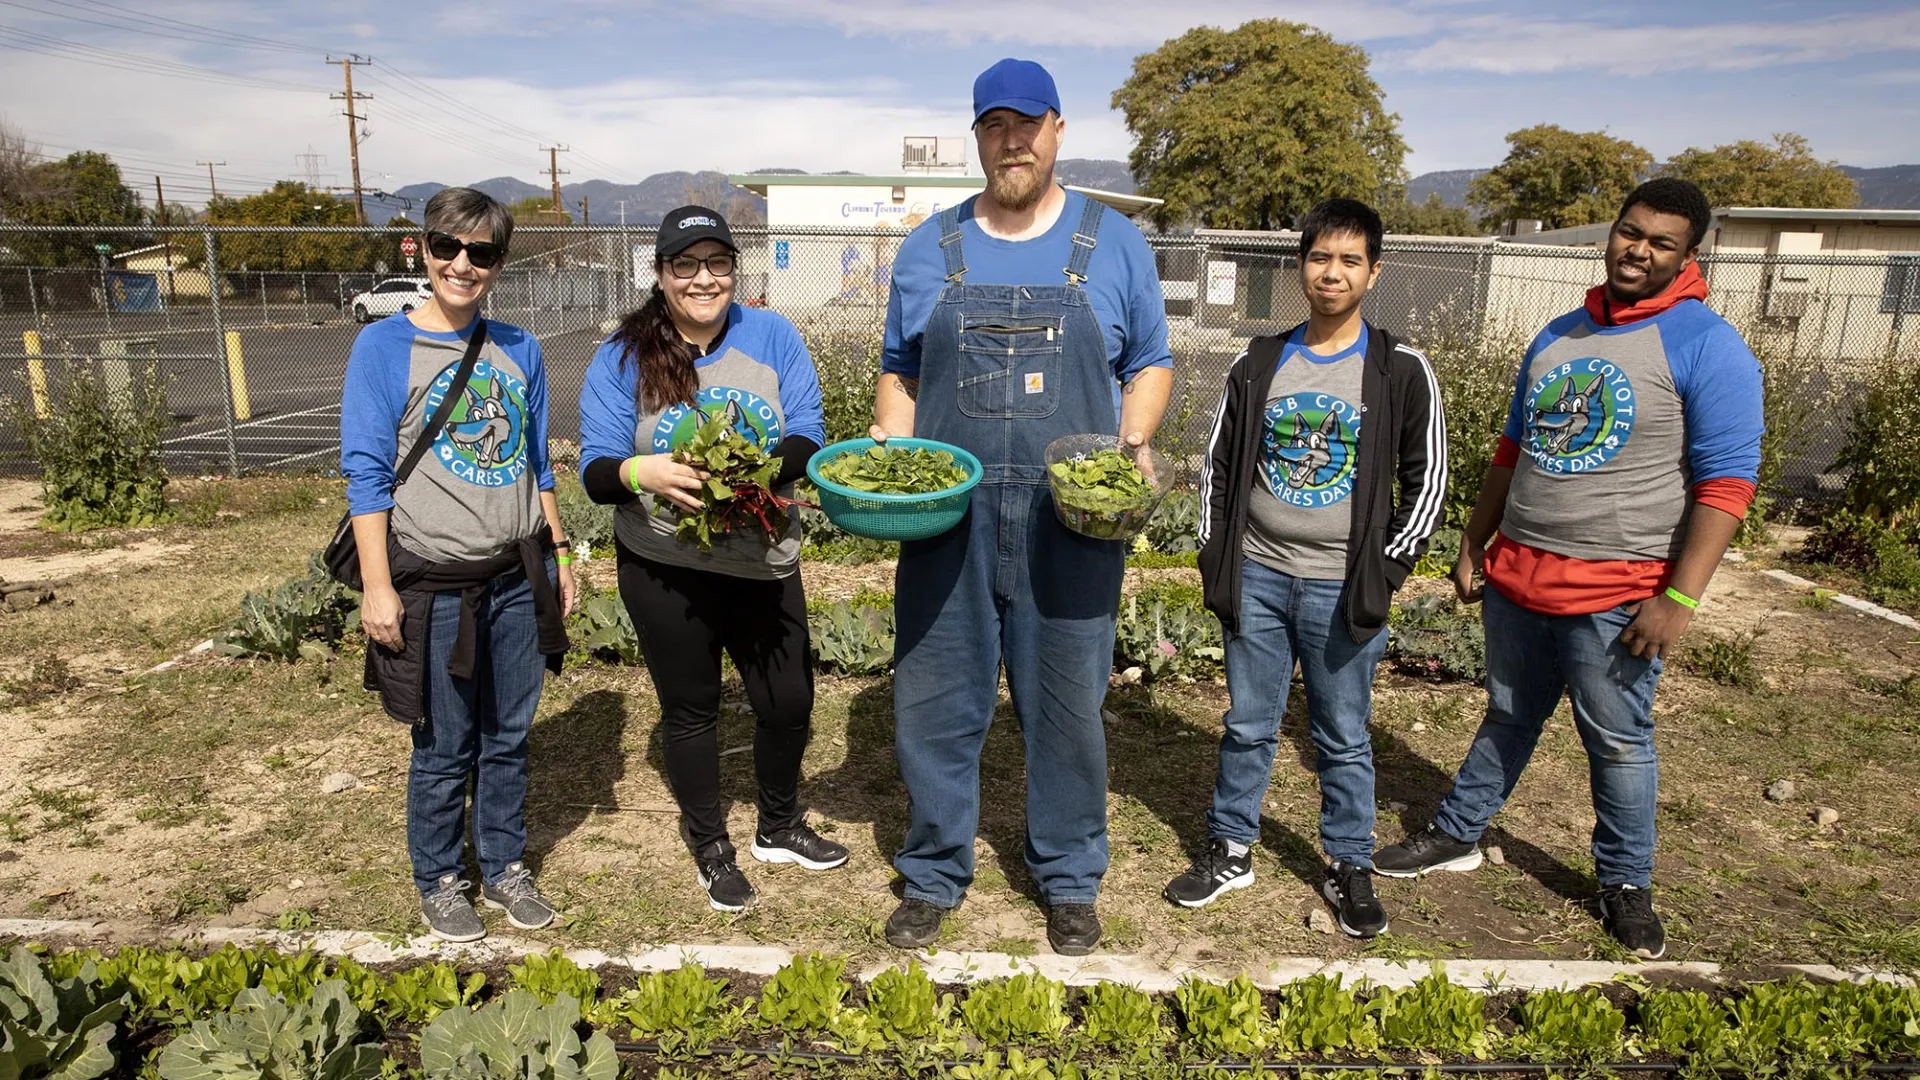 From left, Kristen Stutz, director of the Student Assistance in Learning (SAIL) program at CSUSB; student Sandra Garcia; contract farmer Kevin Head; student CJ Silvestre; and Terrence McCullough, at the Anne Shirrells Community Garden during the 2023 Coyote Cares Day at the Akoma Unity Center in San Bernardino.